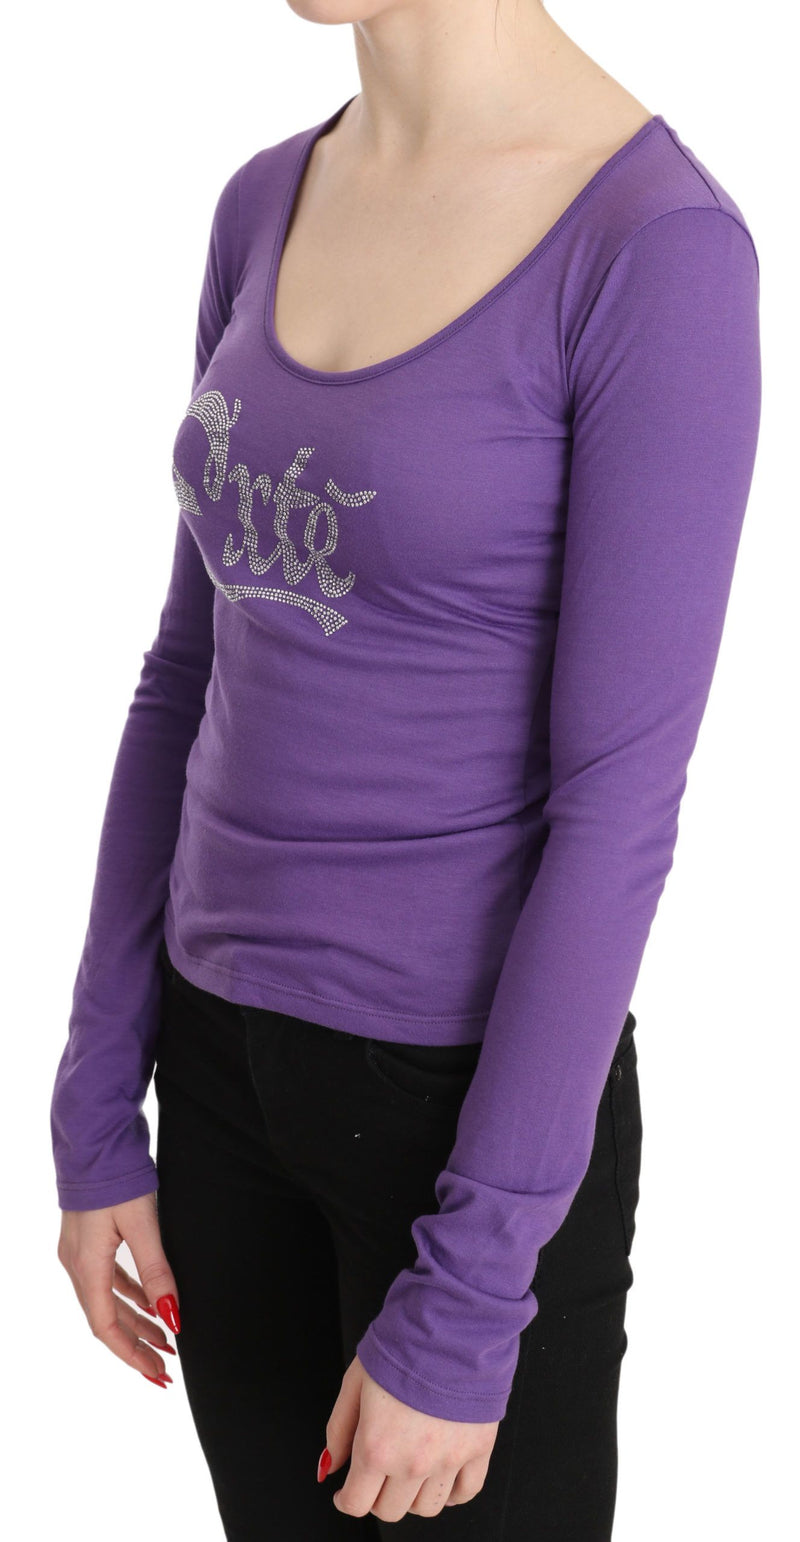 Exte Purple Exte Crystal Embellished Long Sleeve Top Women's Blouse